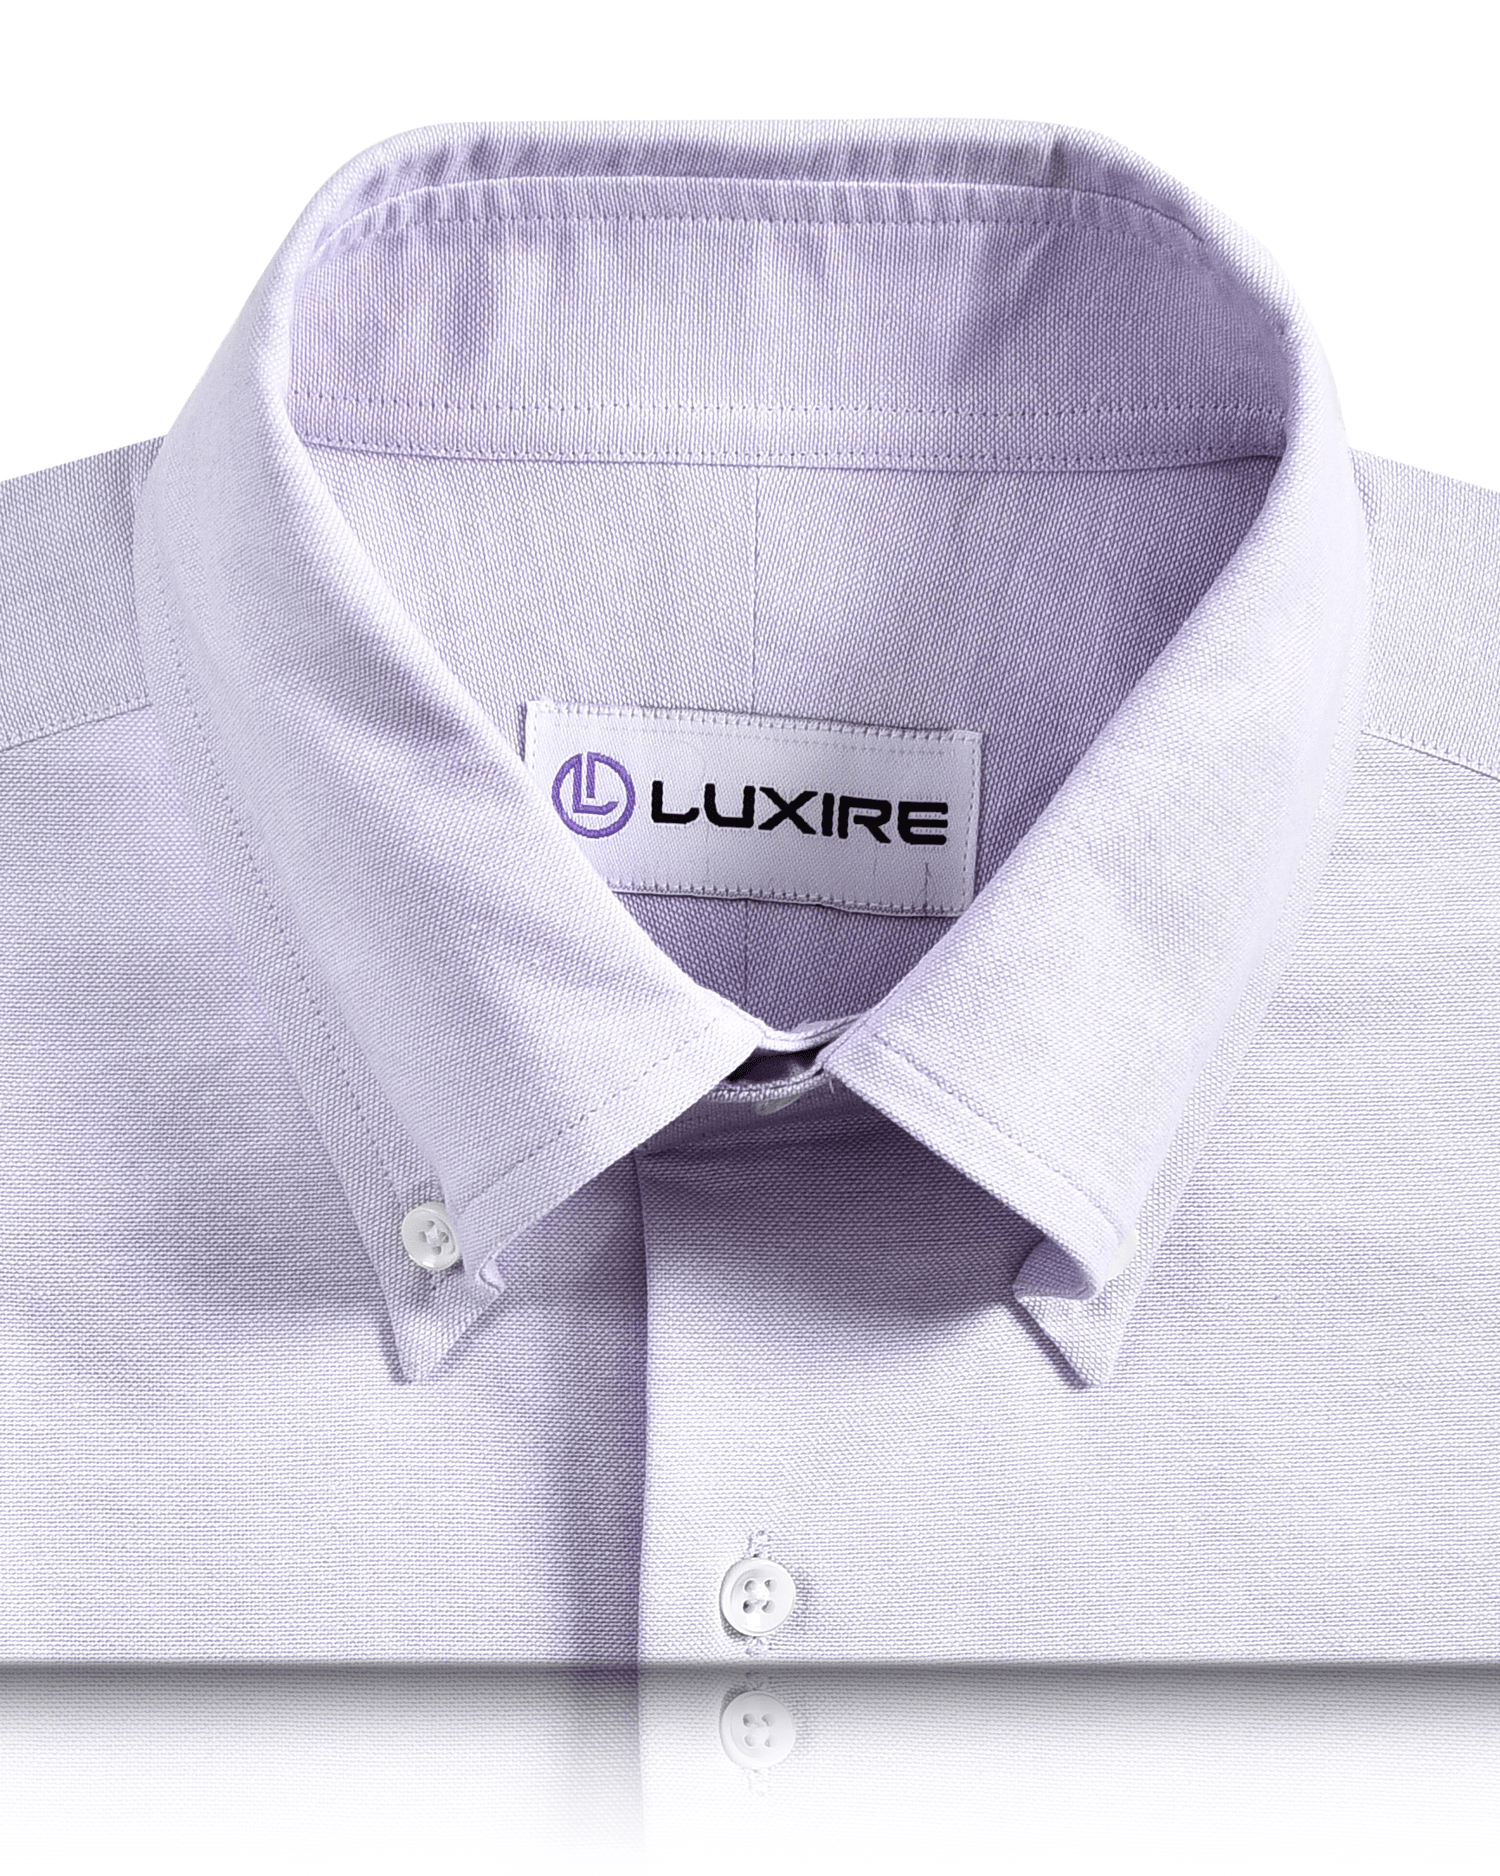 Collar of the custom oxford shirt for men by Luxire in pale purple